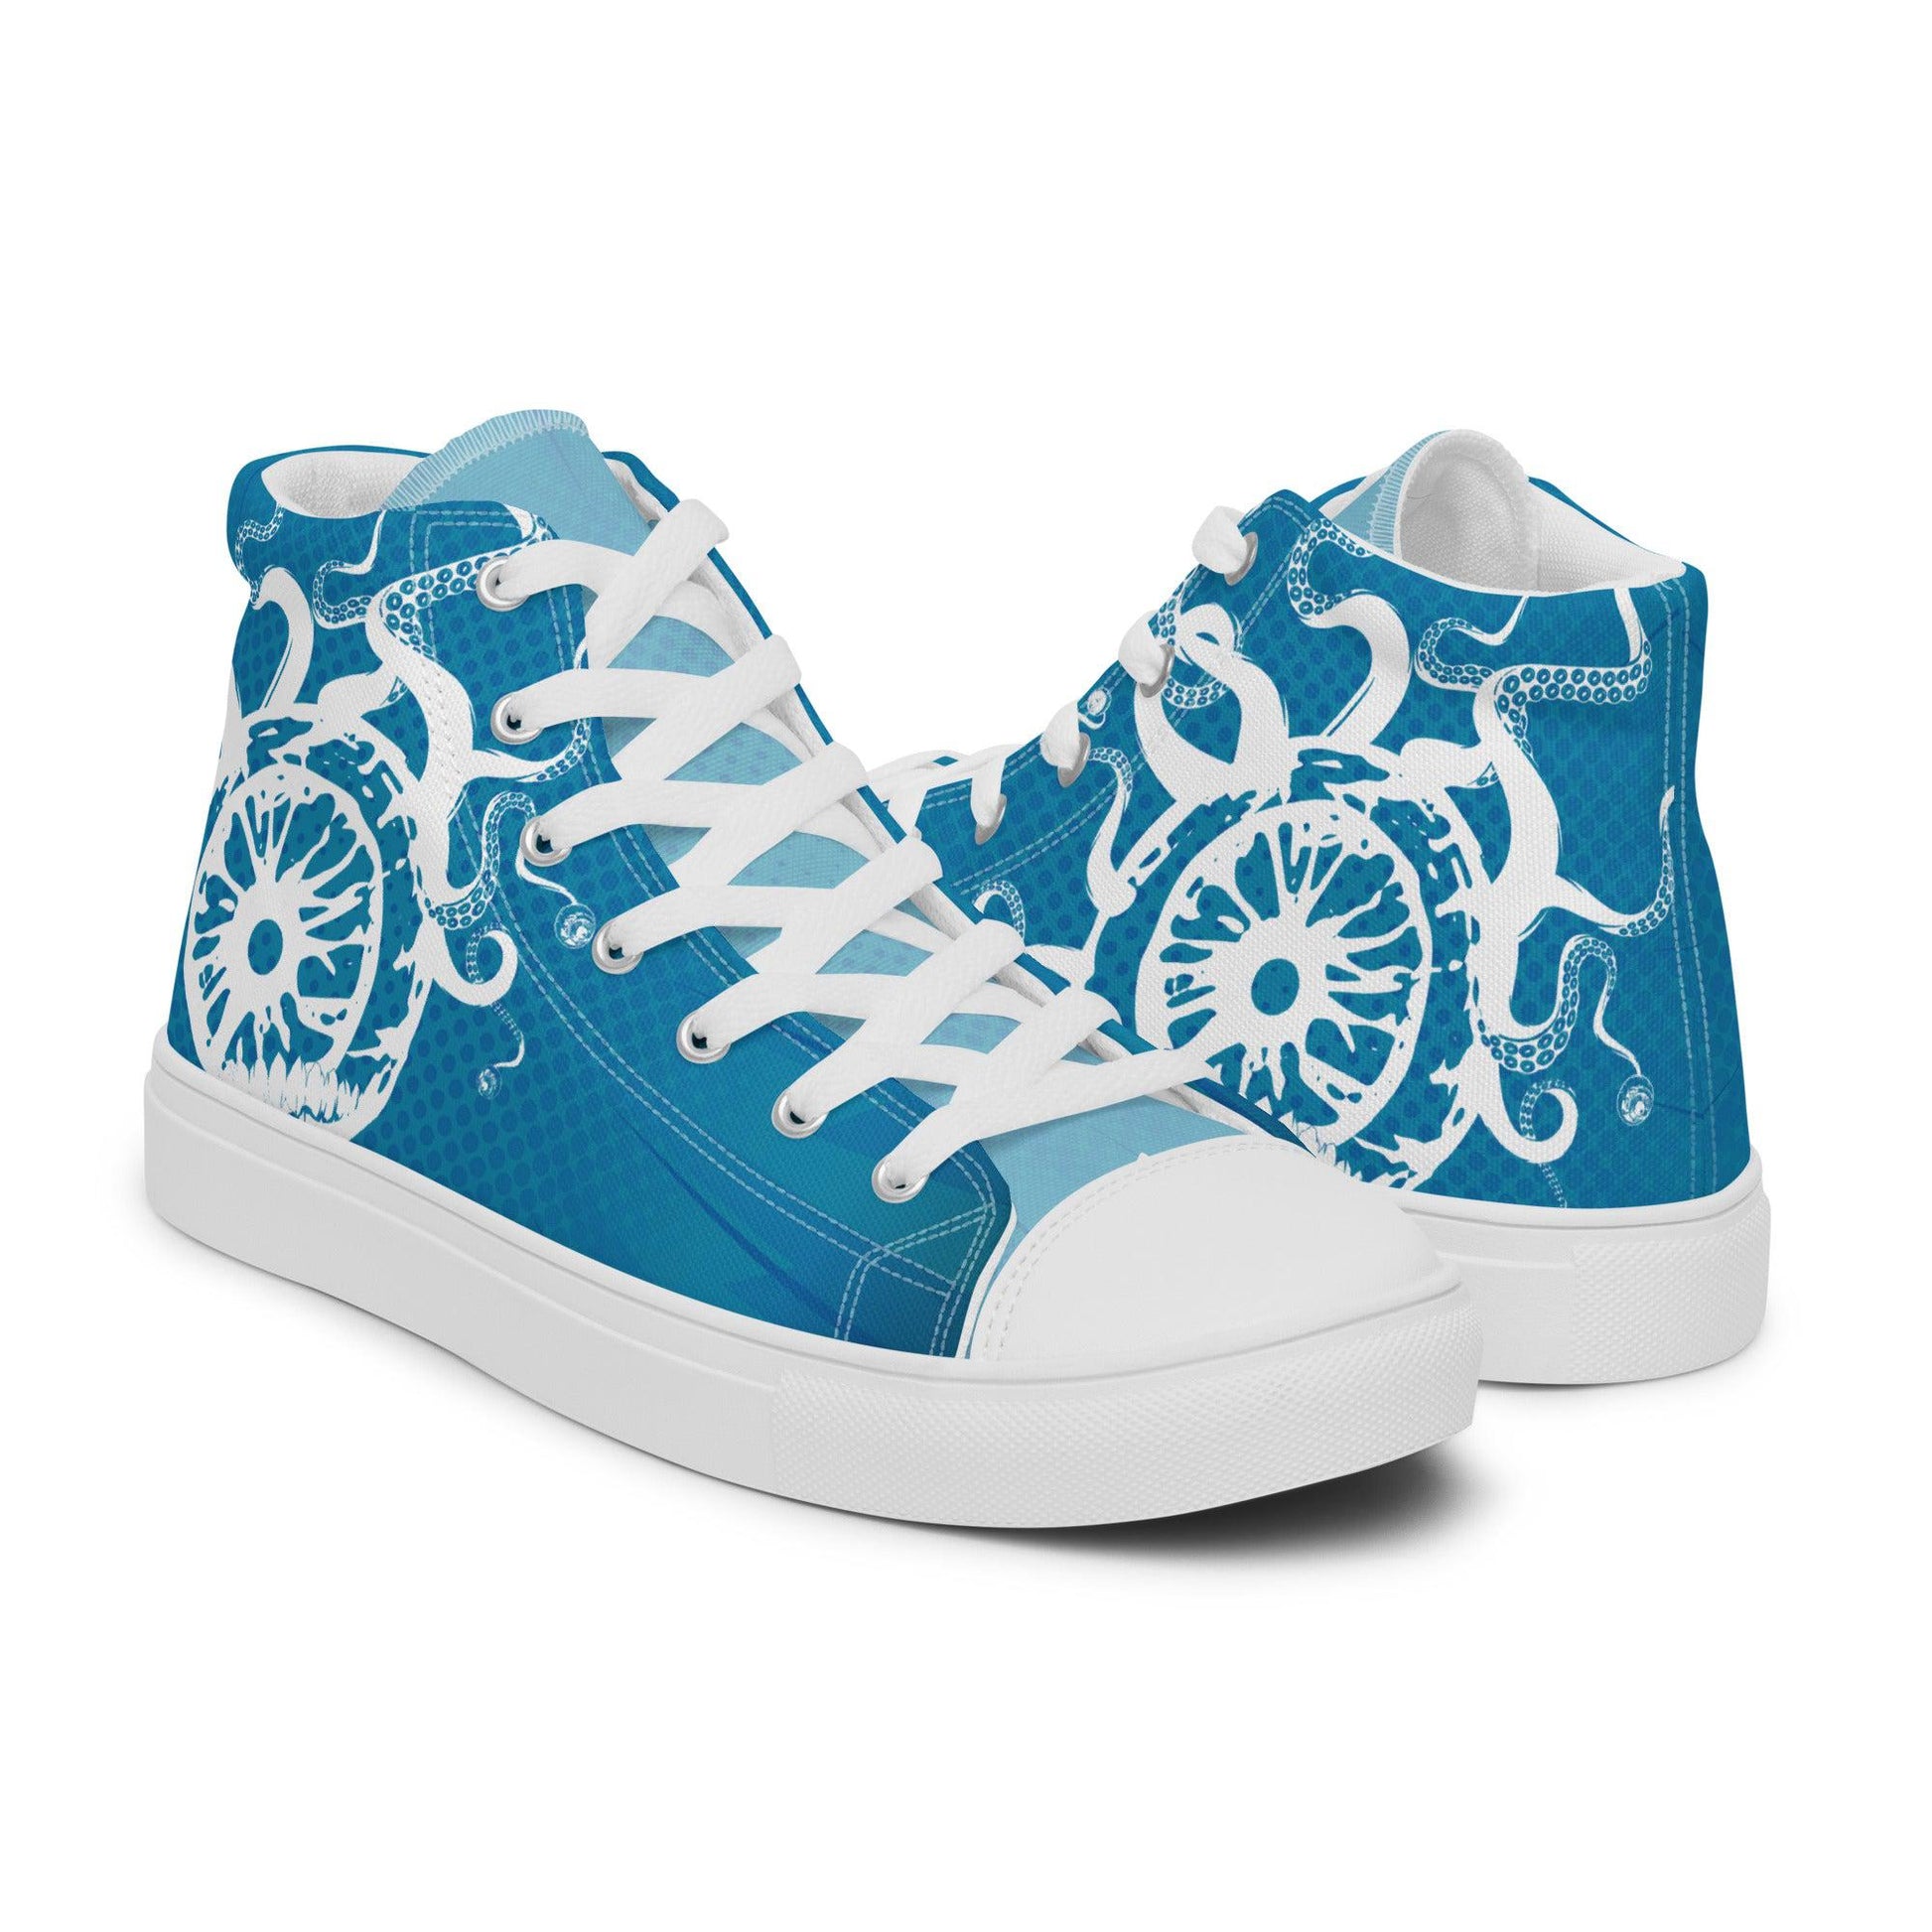 Beholder in White High Top Canvas Shoes (Men’s)